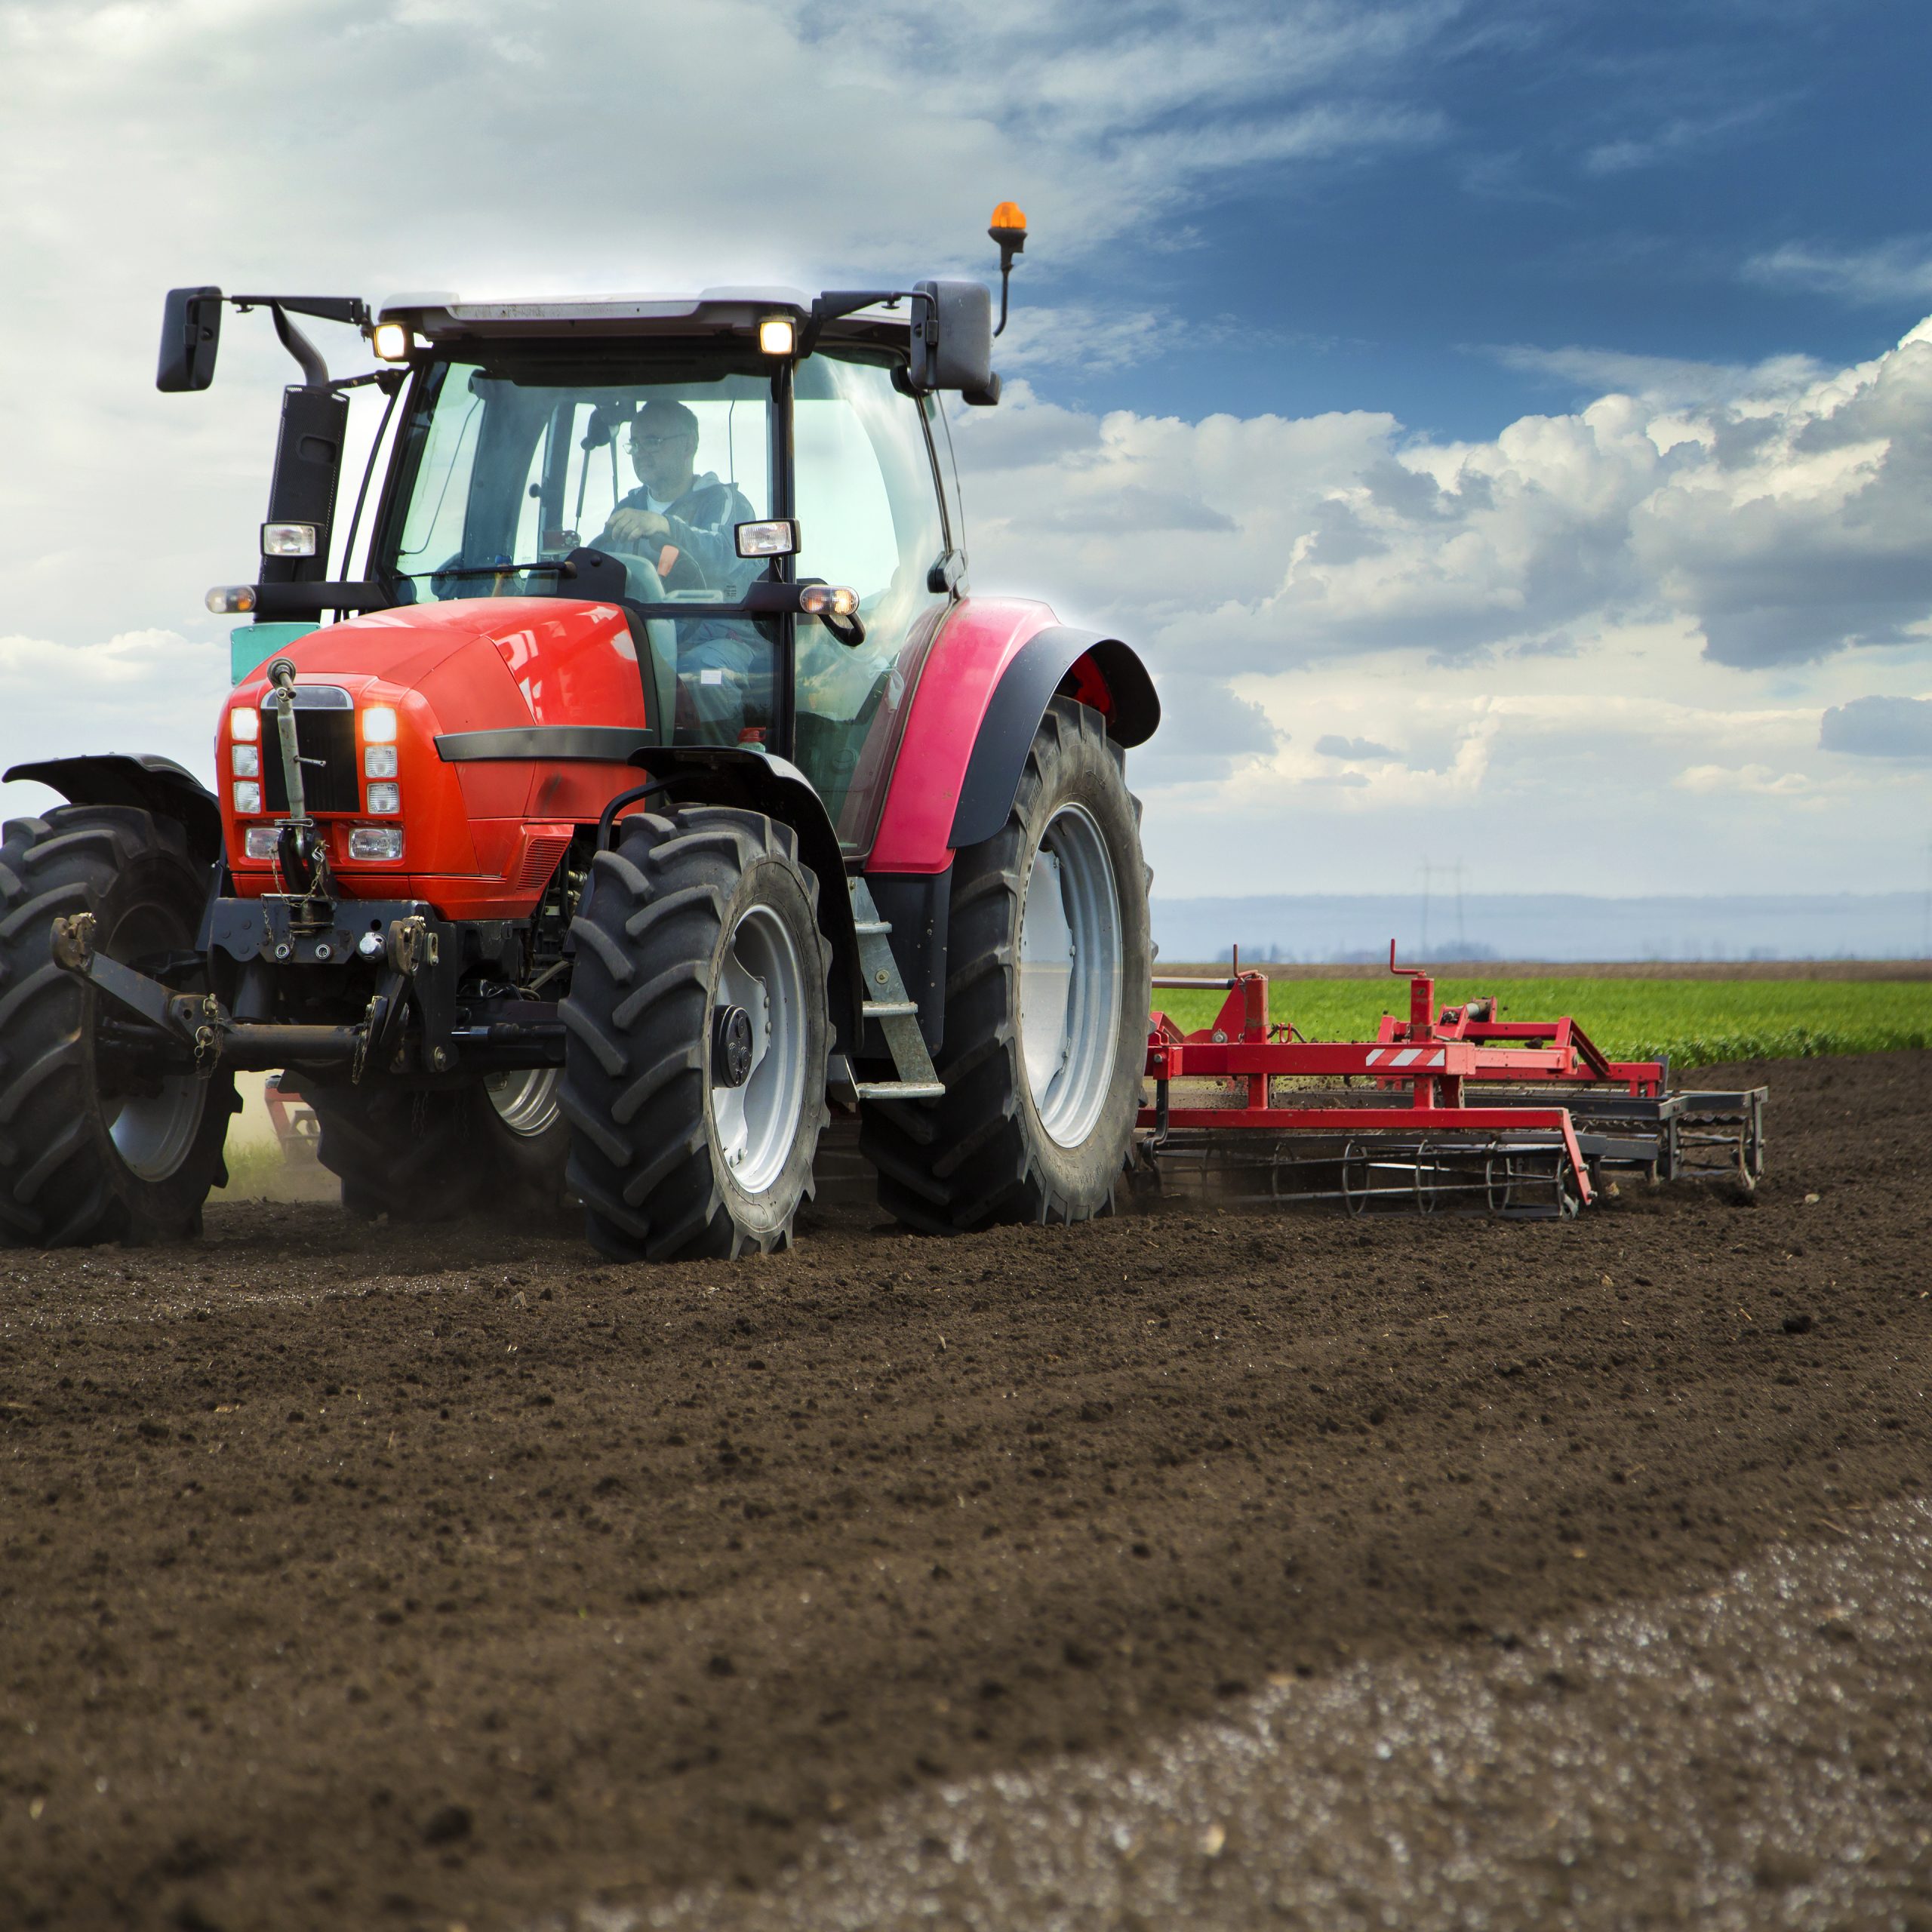 Close-up of agriculture red tractor cultivating field over blue sky